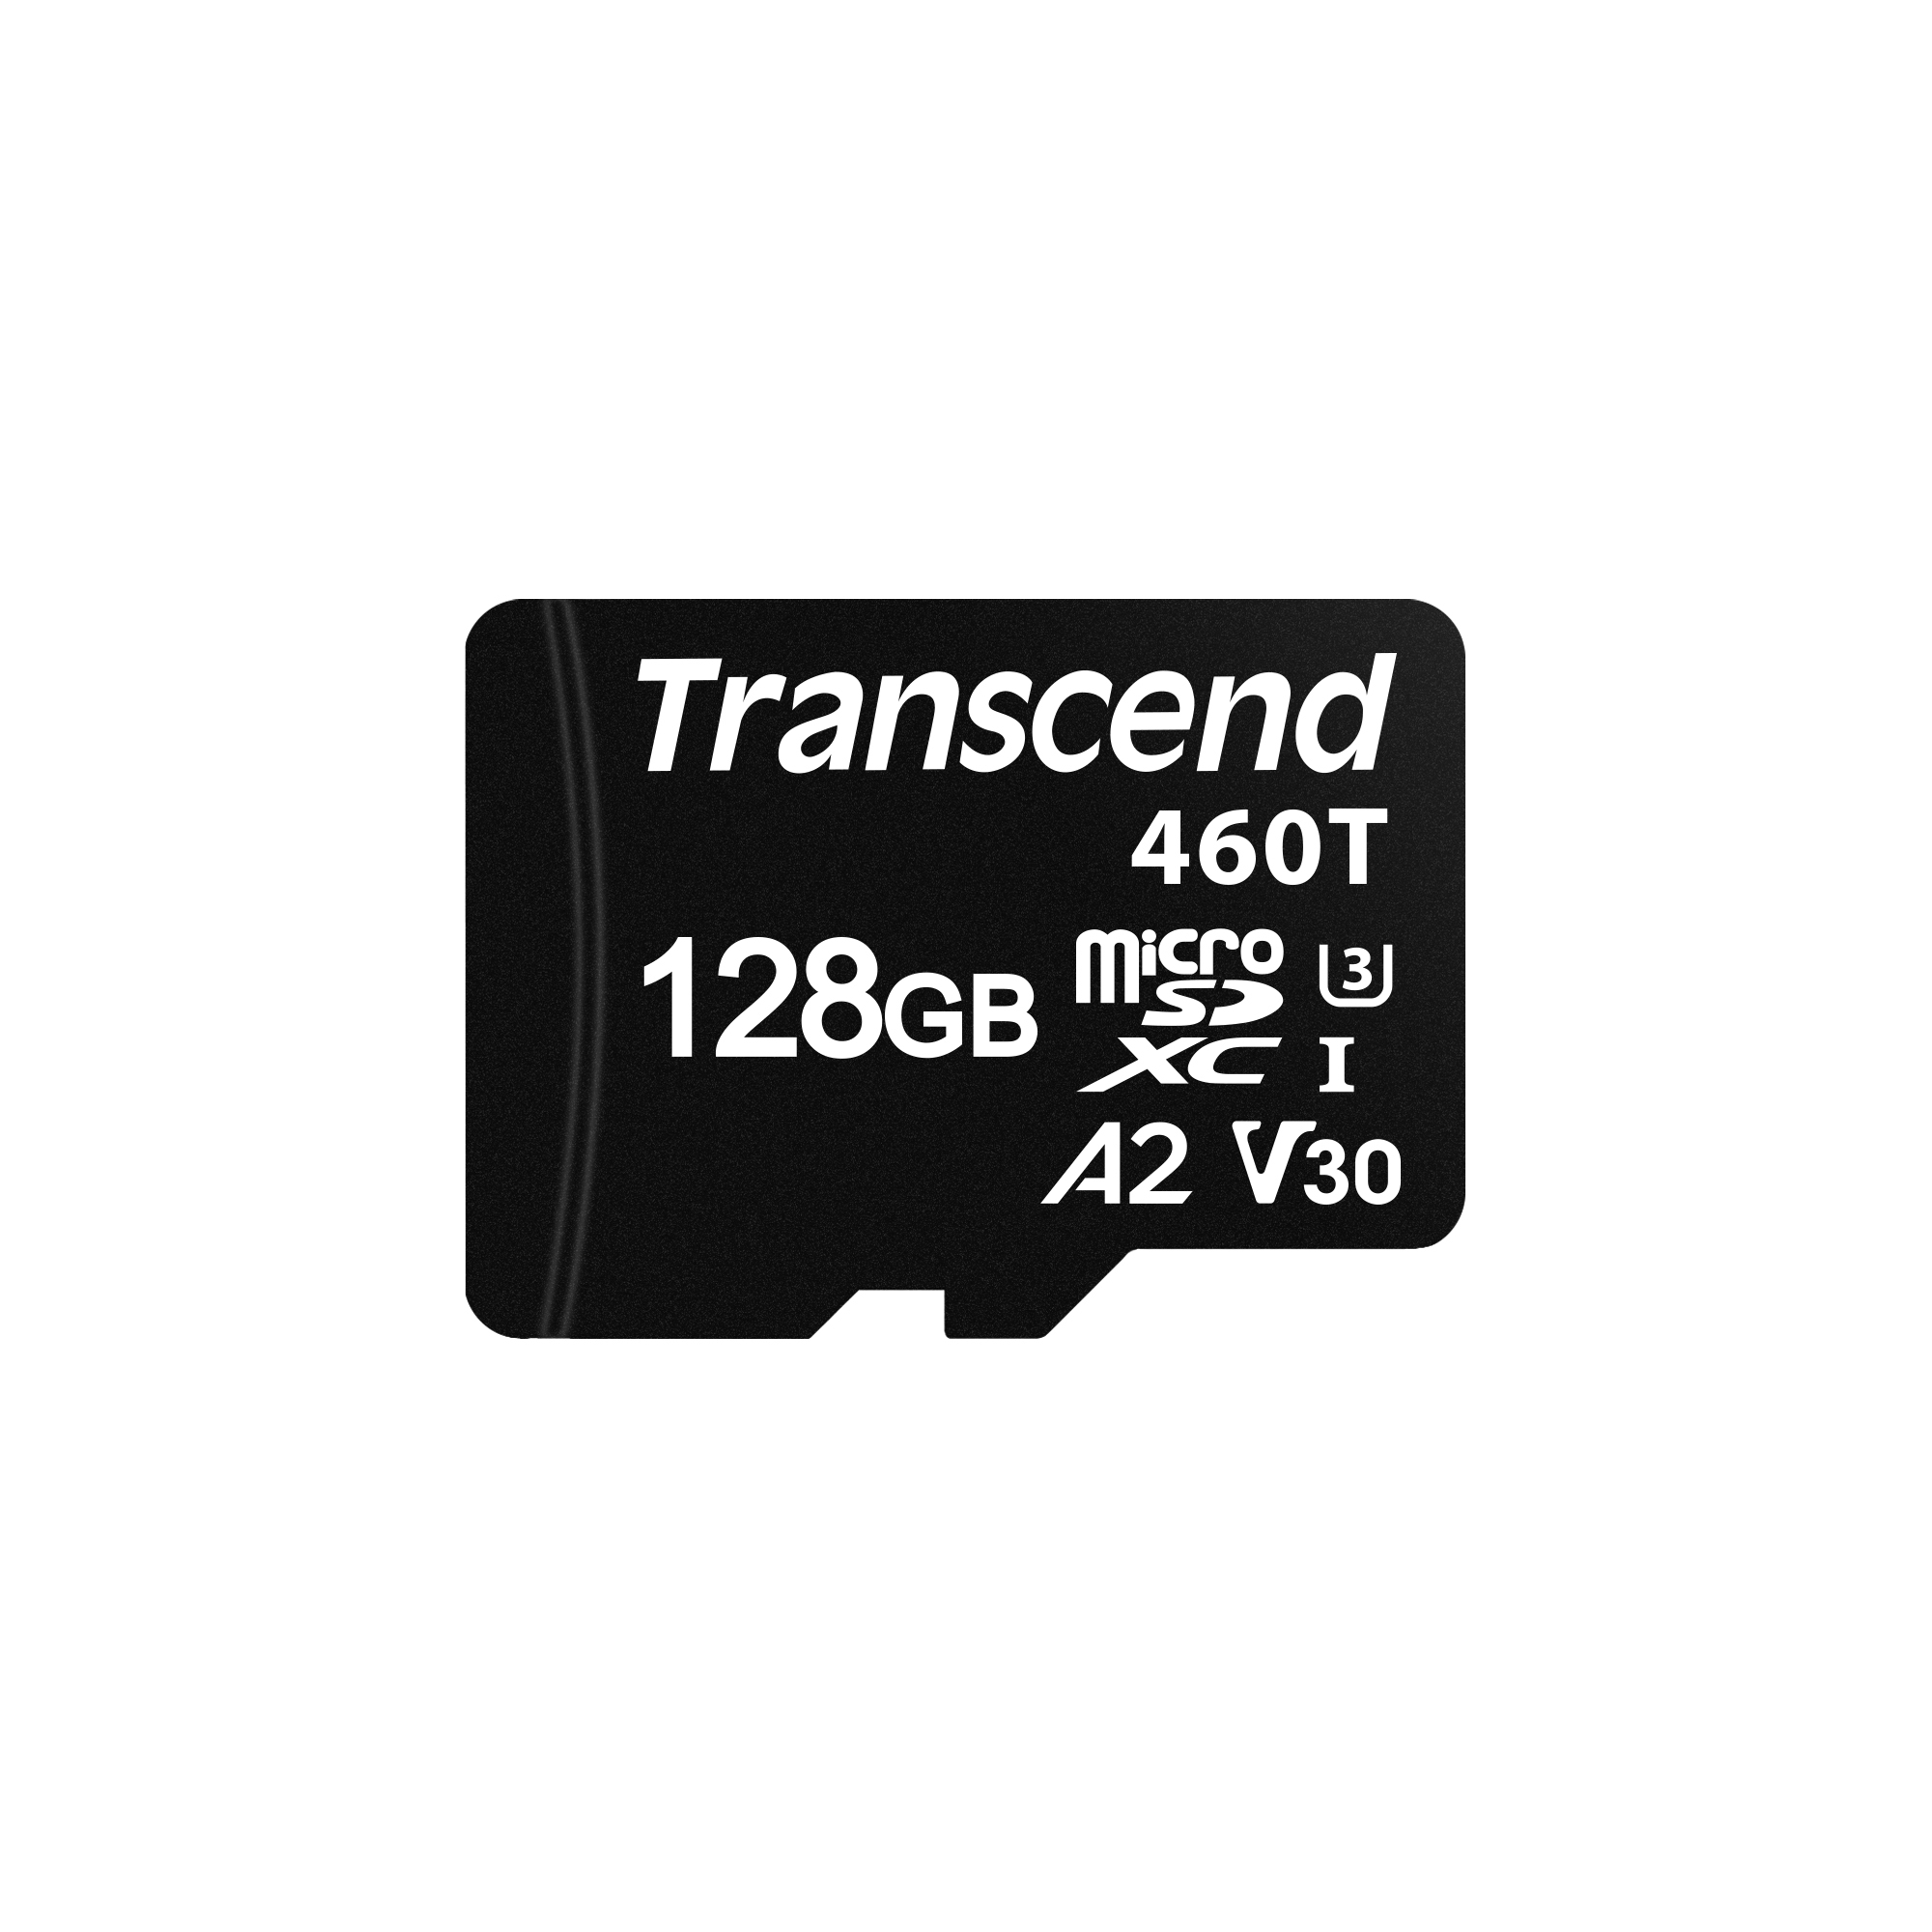 Transcend 128GB micro SD 460T embedded geheugenkaart